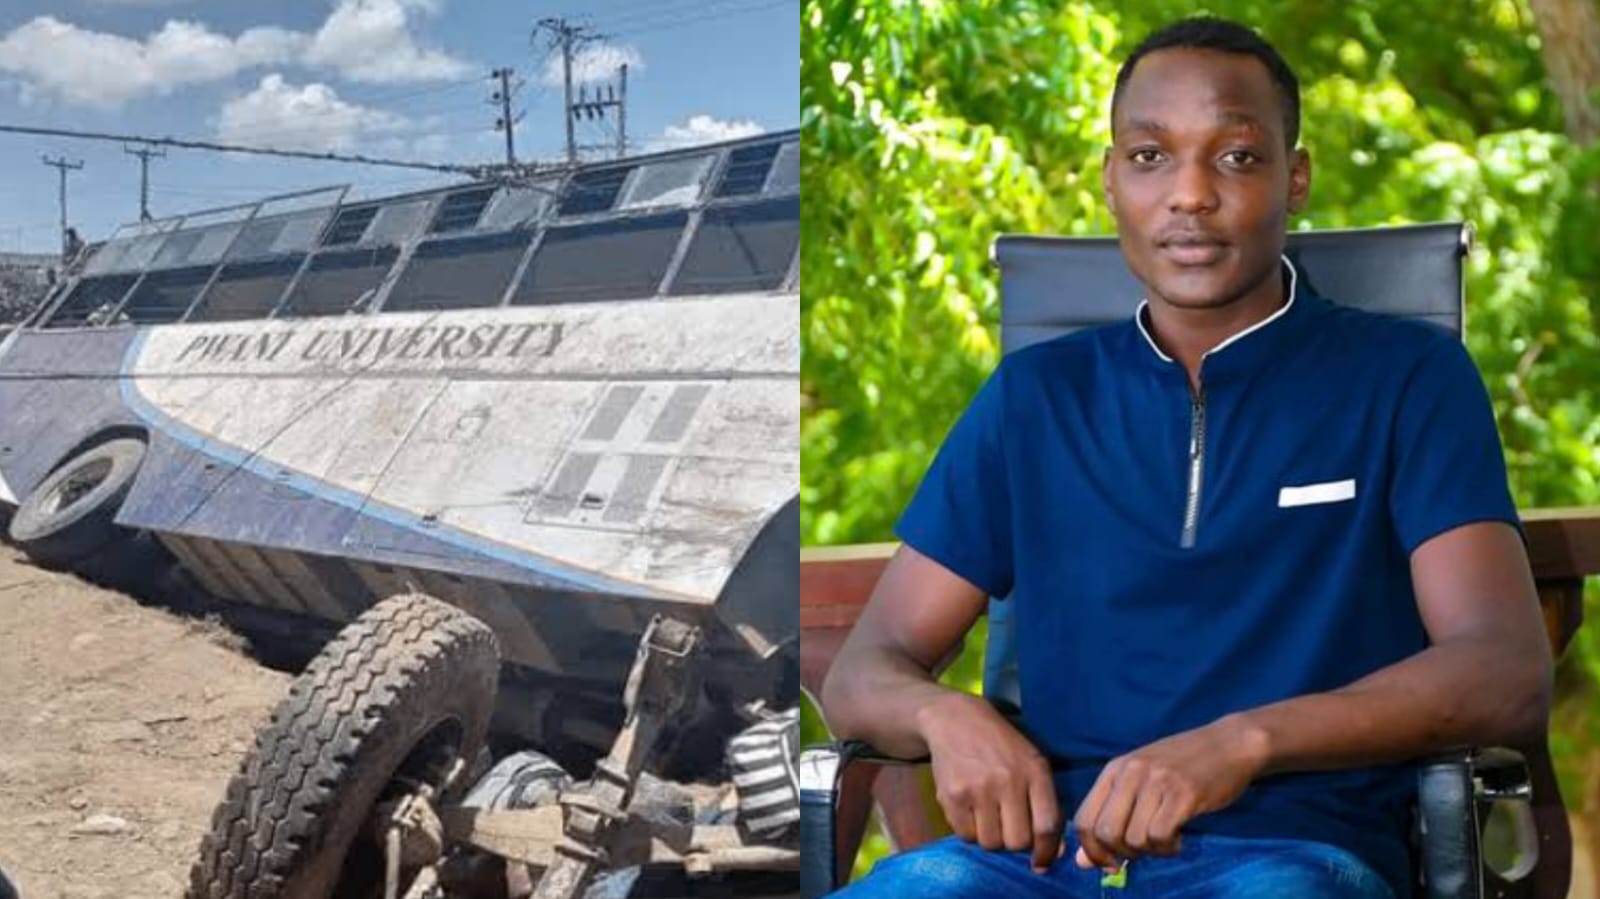 Pwani University Students Who Survived Accident Dies at KNH